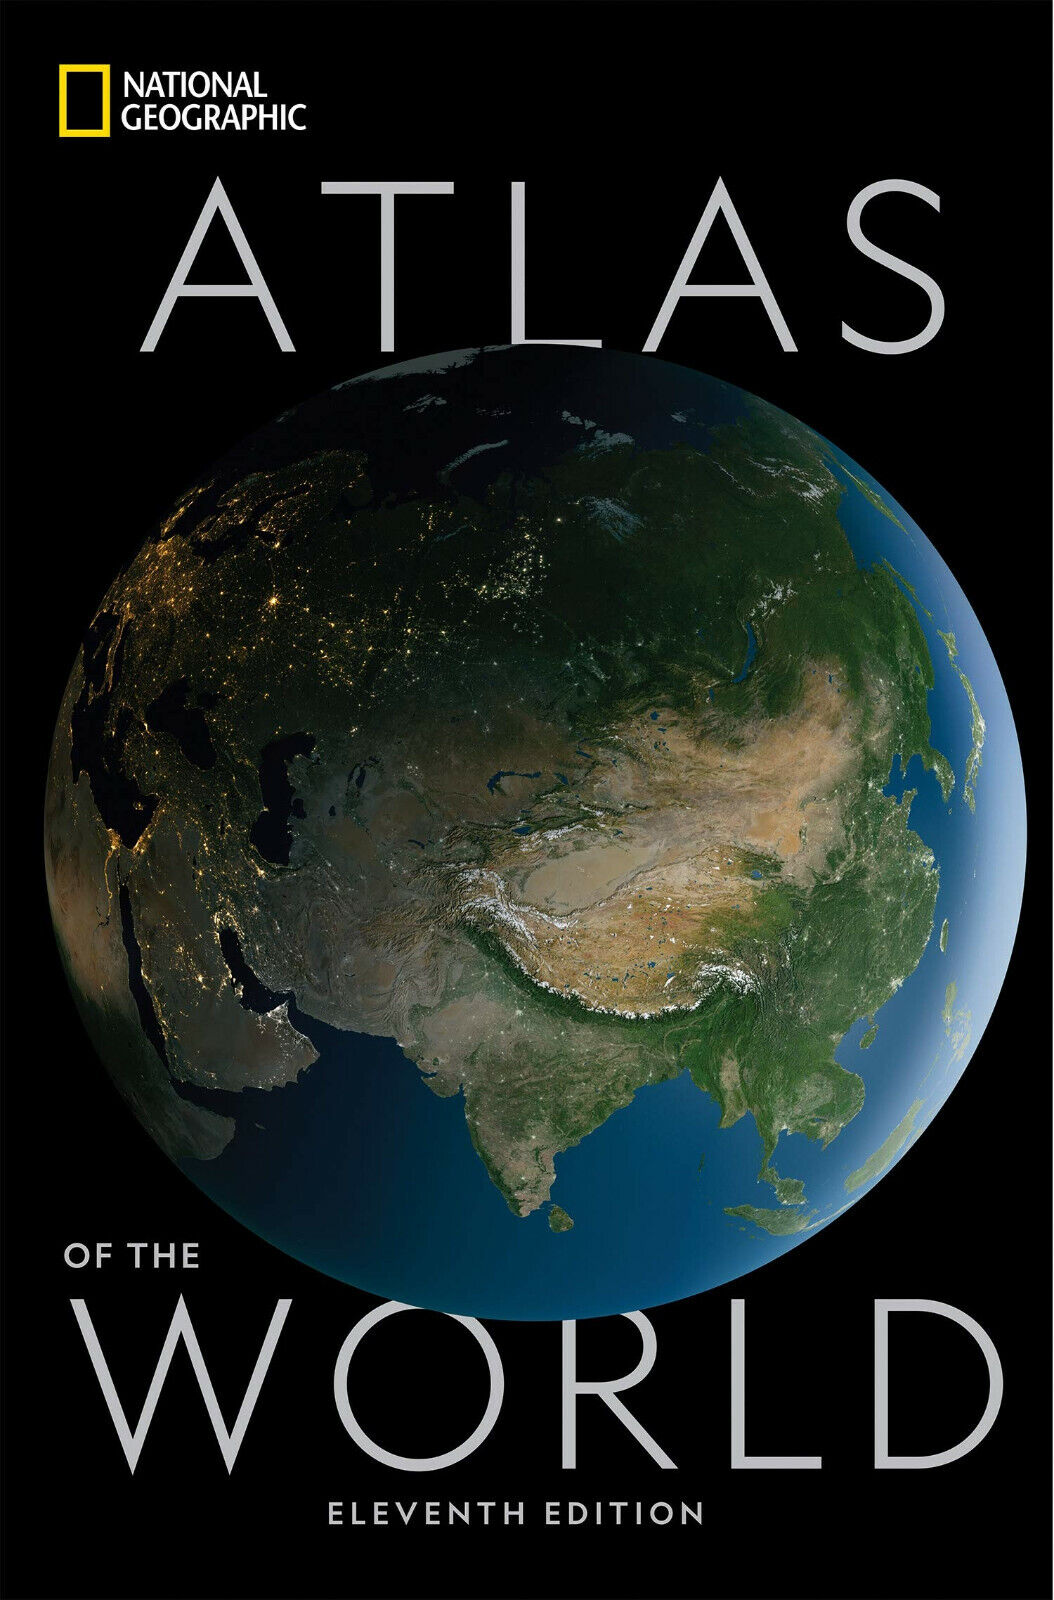 National Geographic Atlas of the World - National Geographic, Alex Tait - 2019